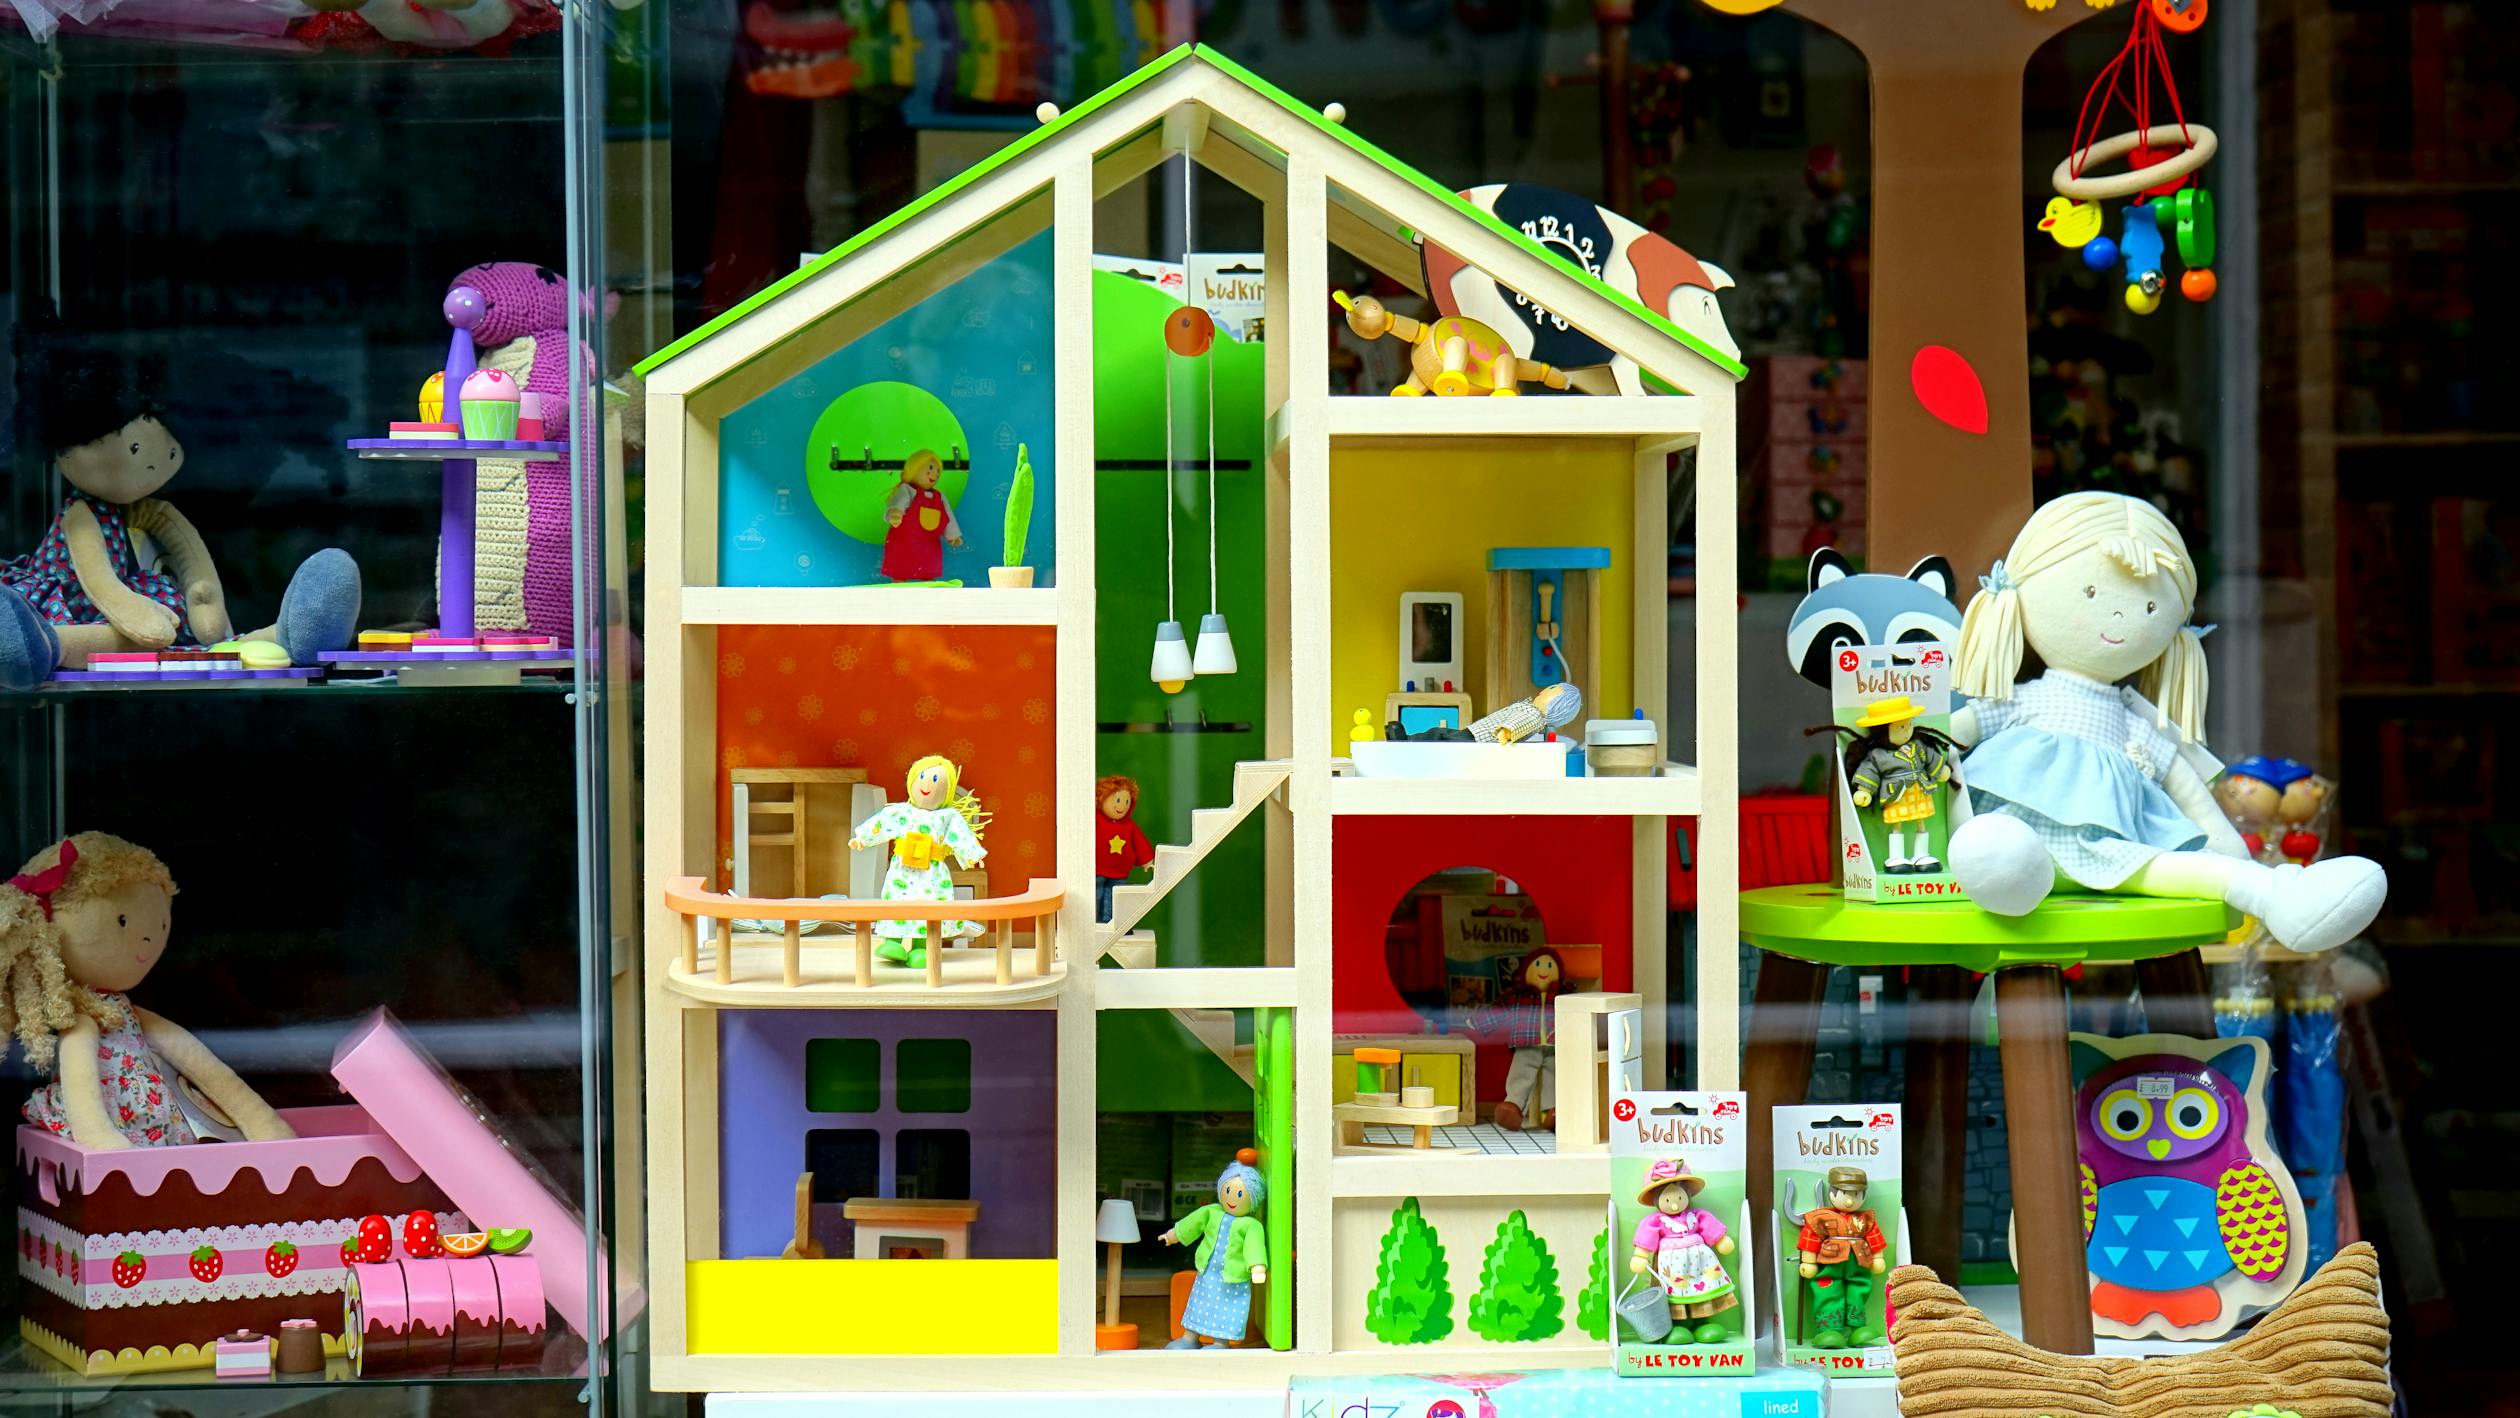 Play House Photo by Mike Bird from Pexels: https://www.pexels.com/photo/white-dollhouse-191360/